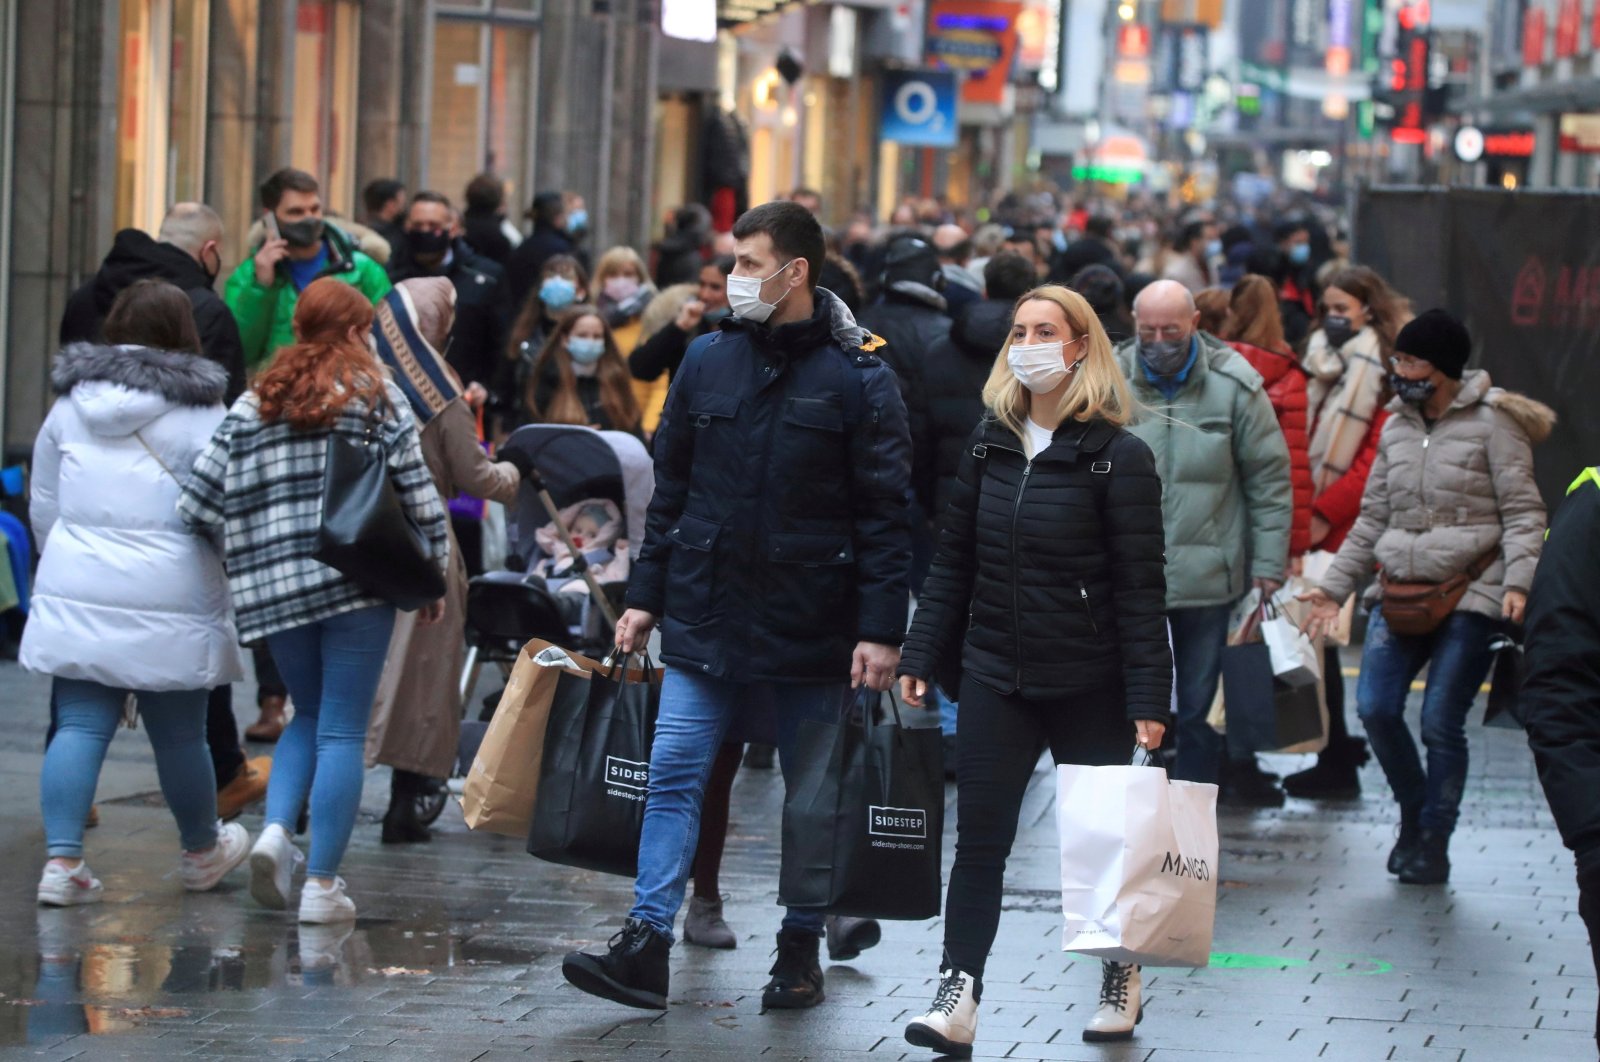 Shoppers wear masks and fill Cologne's main shopping street Hohe Strasse (High Street) in Cologne, Germany, Dec. 12, 2020. (Reuters Photo)